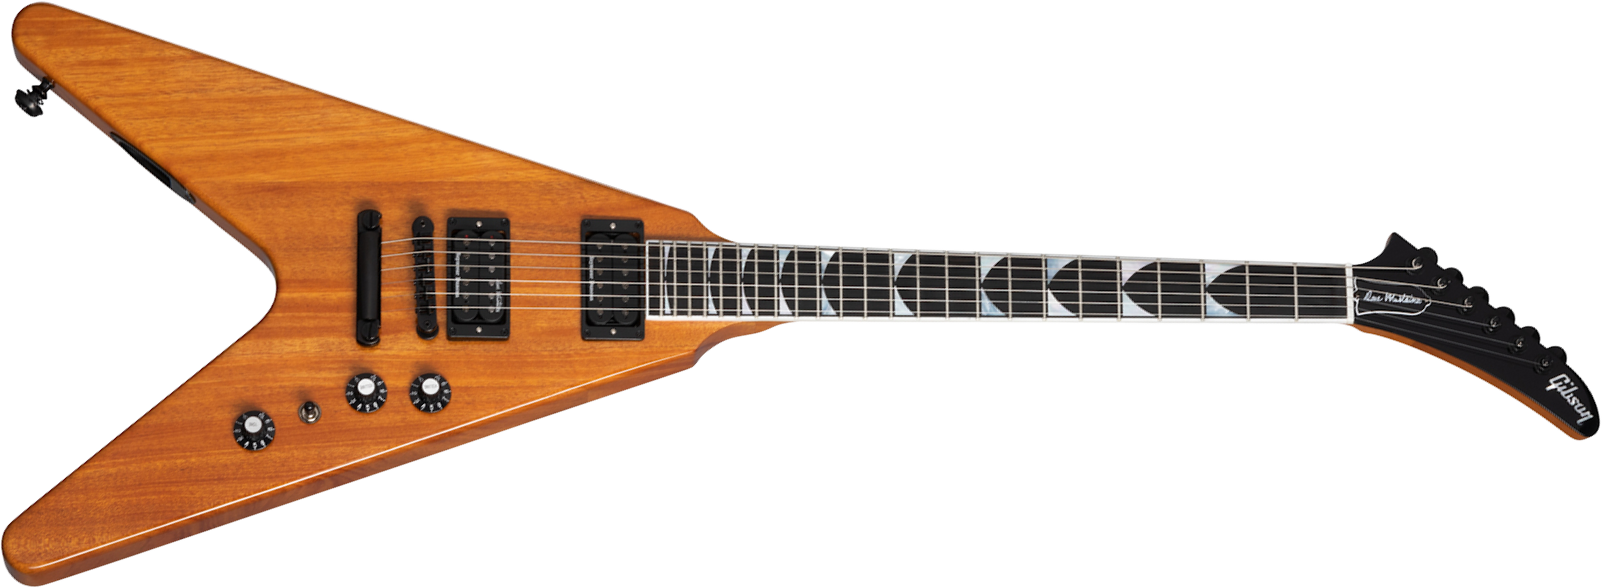 Gibson Dave Mustaine Flying V Exp Signature 2h Ht Eb - Antique Natural - Guitarra electrica metalica - Main picture